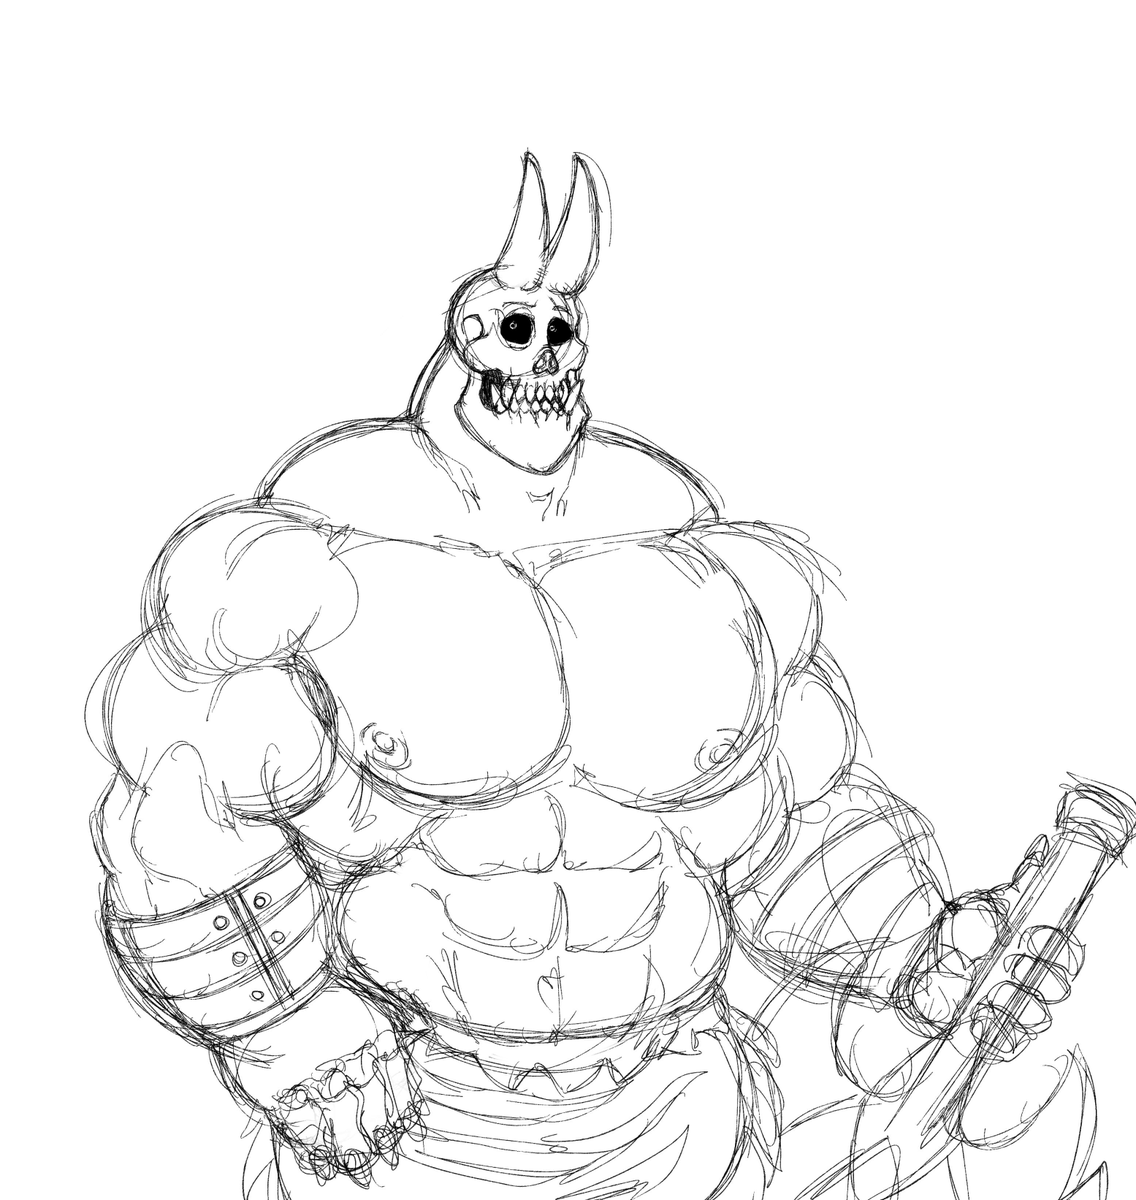 @junuonlyone made me notice it's setsubun, the japanese day of the season change when onis gets beans tossed at them, i may have a skull but i am actually based on an oni. but also have a more traditional variant for shit and giggles